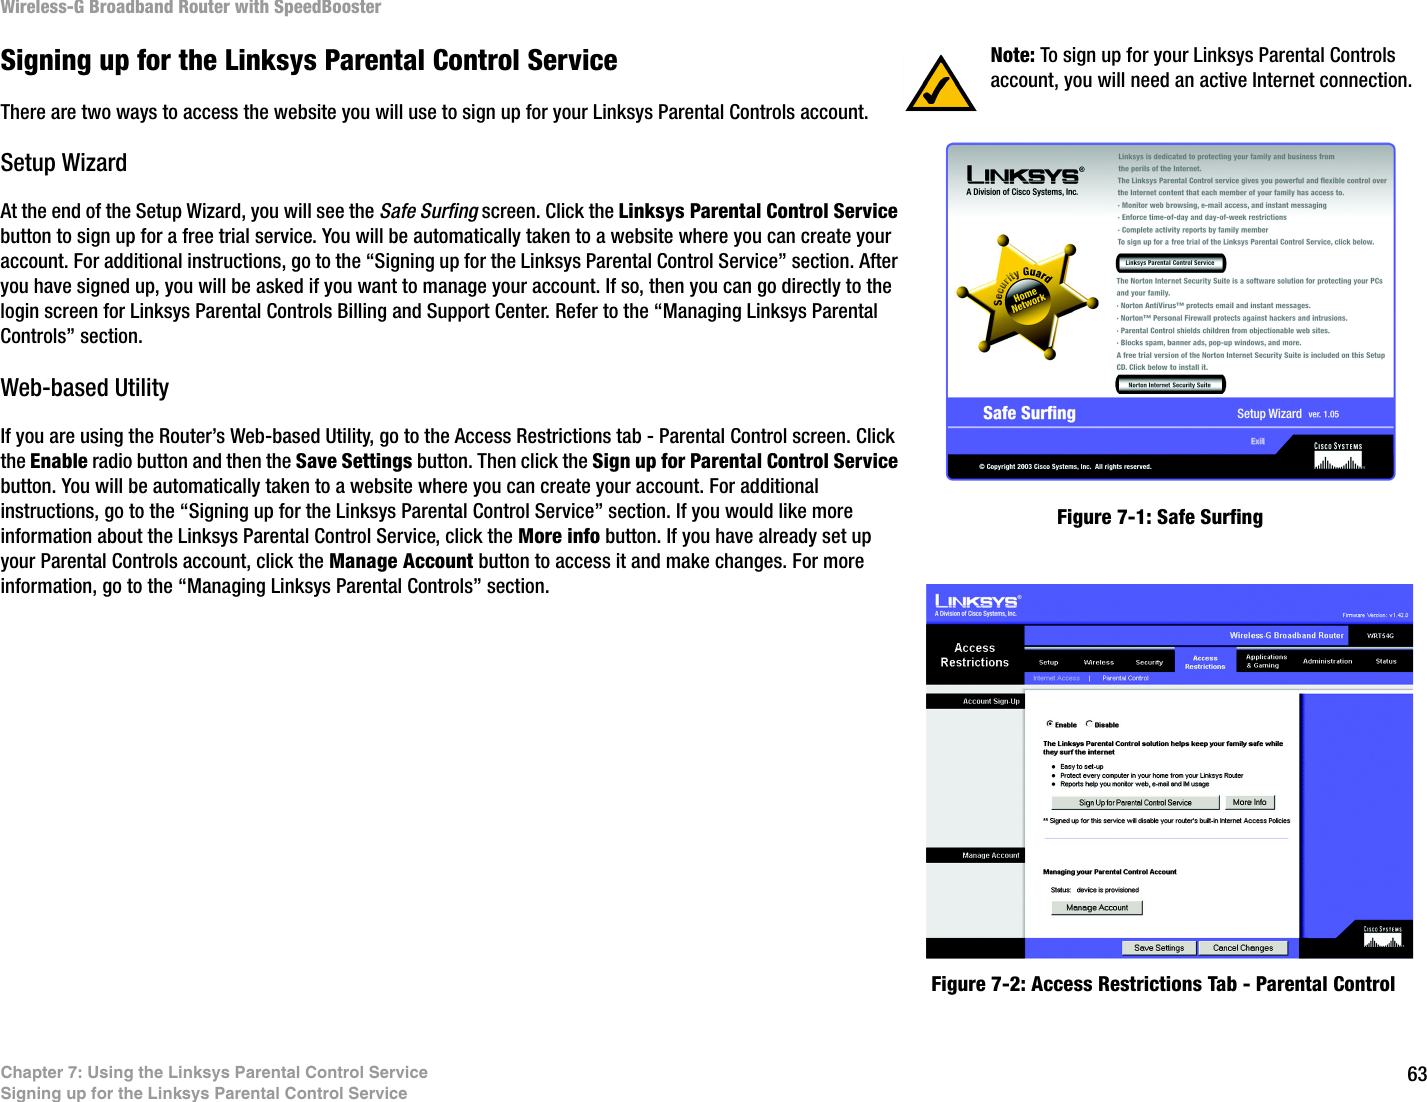 63Chapter 7: Using the Linksys Parental Control ServiceSigning up for the Linksys Parental Control ServiceWireless-G Broadband Router with SpeedBoosterSigning up for the Linksys Parental Control ServiceThere are two ways to access the website you will use to sign up for your Linksys Parental Controls account.Setup WizardAt the end of the Setup Wizard, you will see the Safe Surfing screen. Click the Linksys Parental Control Service button to sign up for a free trial service. You will be automatically taken to a website where you can create your account. For additional instructions, go to the “Signing up for the Linksys Parental Control Service” section. After you have signed up, you will be asked if you want to manage your account. If so, then you can go directly to the login screen for Linksys Parental Controls Billing and Support Center. Refer to the “Managing Linksys Parental Controls” section.Web-based UtilityIf you are using the Router’s Web-based Utility, go to the Access Restrictions tab - Parental Control screen. Click the Enable radio button and then the Save Settings button. Then click the Sign up for Parental Control Service button. You will be automatically taken to a website where you can create your account. For additional instructions, go to the “Signing up for the Linksys Parental Control Service” section. If you would like more information about the Linksys Parental Control Service, click the More info button. If you have already set up your Parental Controls account, click the Manage Account button to access it and make changes. For more information, go to the “Managing Linksys Parental Controls” section.Figure 7-2: Access Restrictions Tab - Parental ControlFigure 7-1: Safe SurfingNote: To sign up for your Linksys Parental Controls account, you will need an active Internet connection.